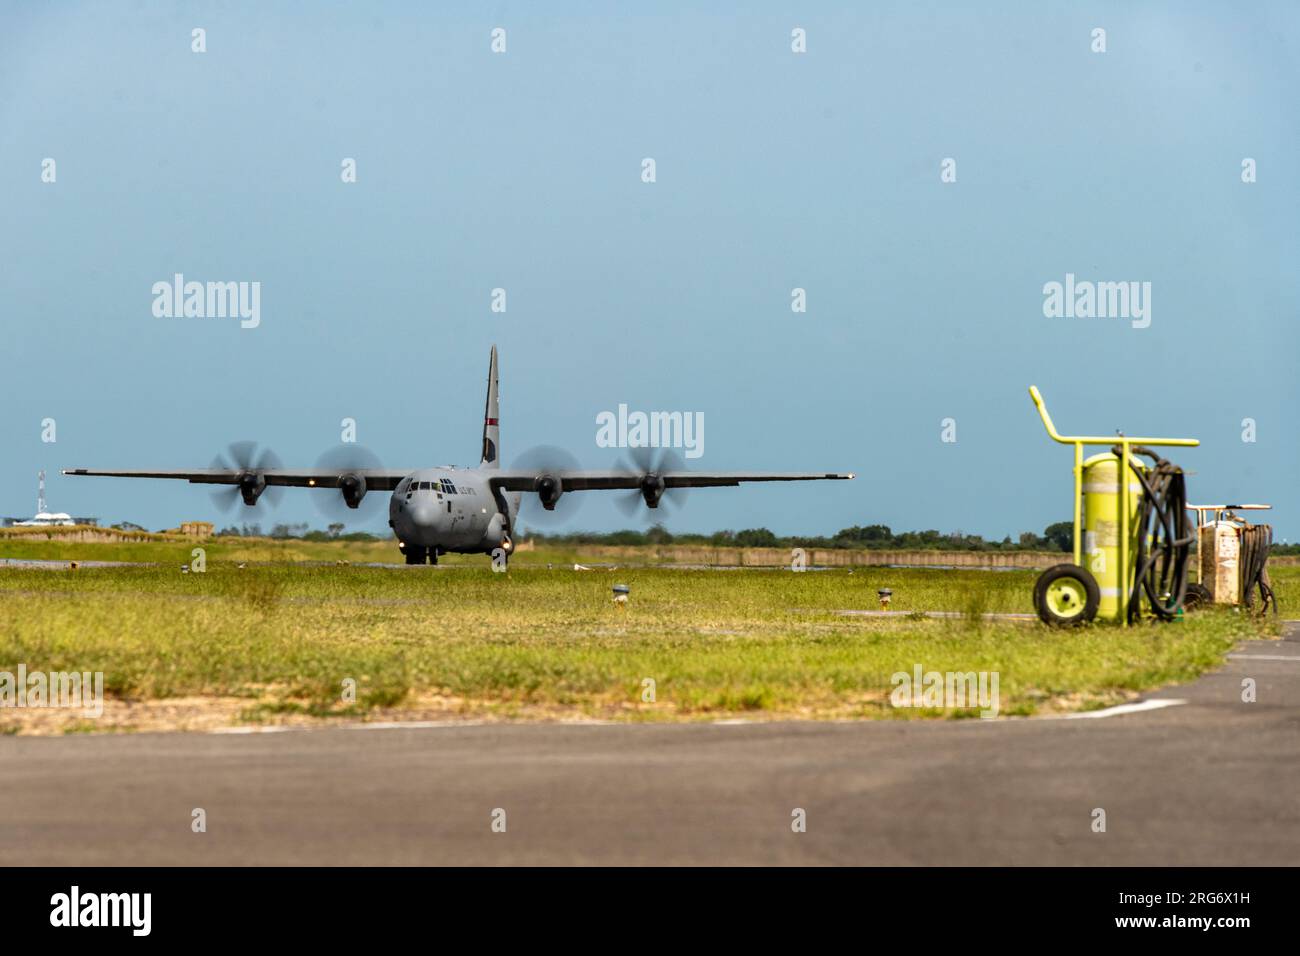 A U.S. Air Force C-130J Super Hercules assigned to the 75th Expeditionary Airlift Squadron, taxis at Magogoni Airfield, Kenya, Aug. 2, 2023. The 75th Expeditionary Airlift Squadron provides tactical airlift support to multiple users across East Africa and the Combined Joint Task Force - Horn of Africa area of responsibility. (U.S. Air Force photo by Tech. Sgt. Dhruv Gopinath) Stock Photo